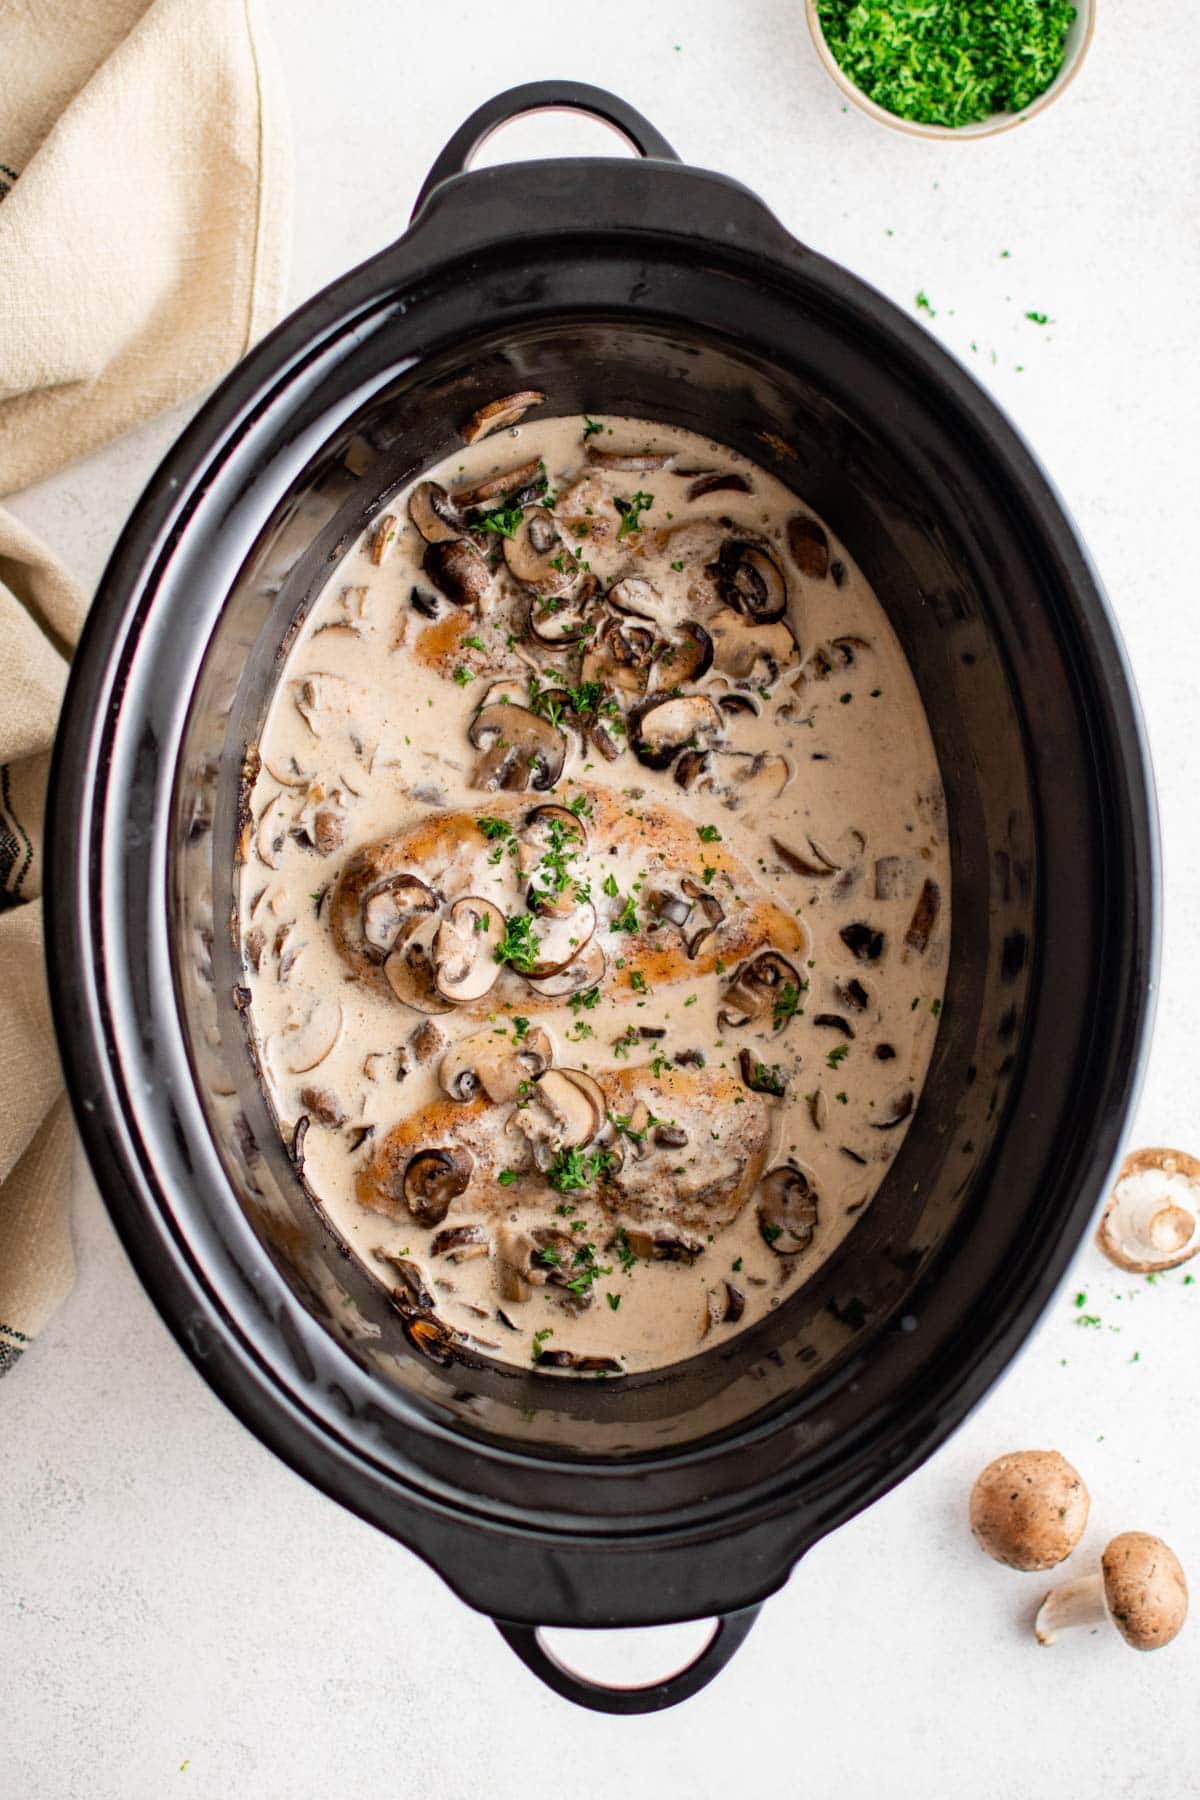 Chicken in a slow cooker with mushrooms and gravy.